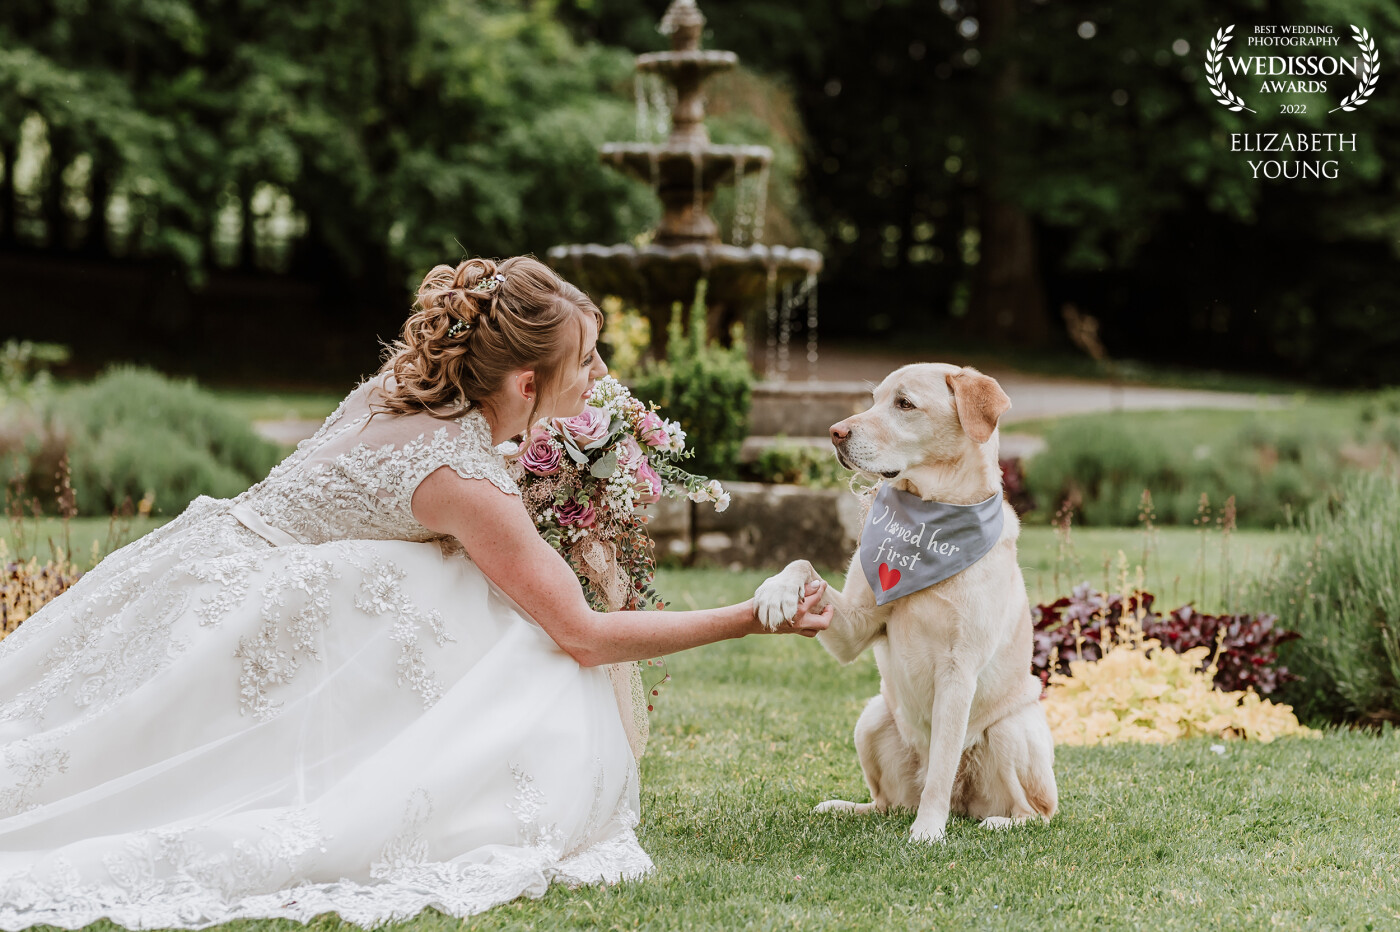 The  couples beloved pet dog certainly stole the show at this wedding. He even had his own bandana made for him as the ring bearer.